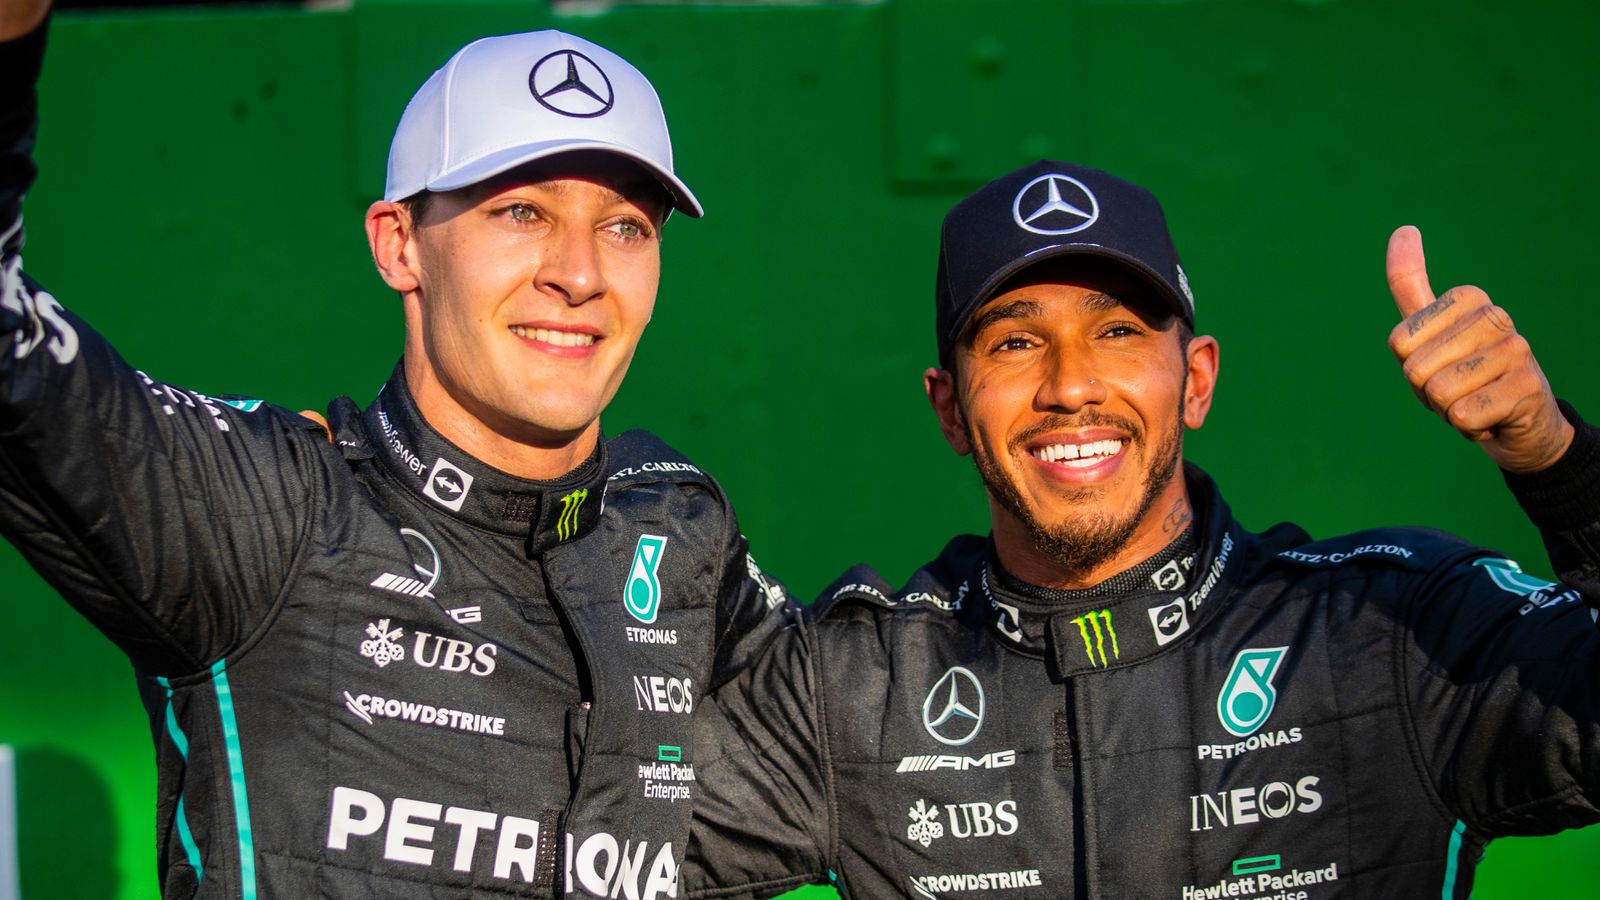 Sao Paulo Grand Prix Russell and Lewis Hamilton to work